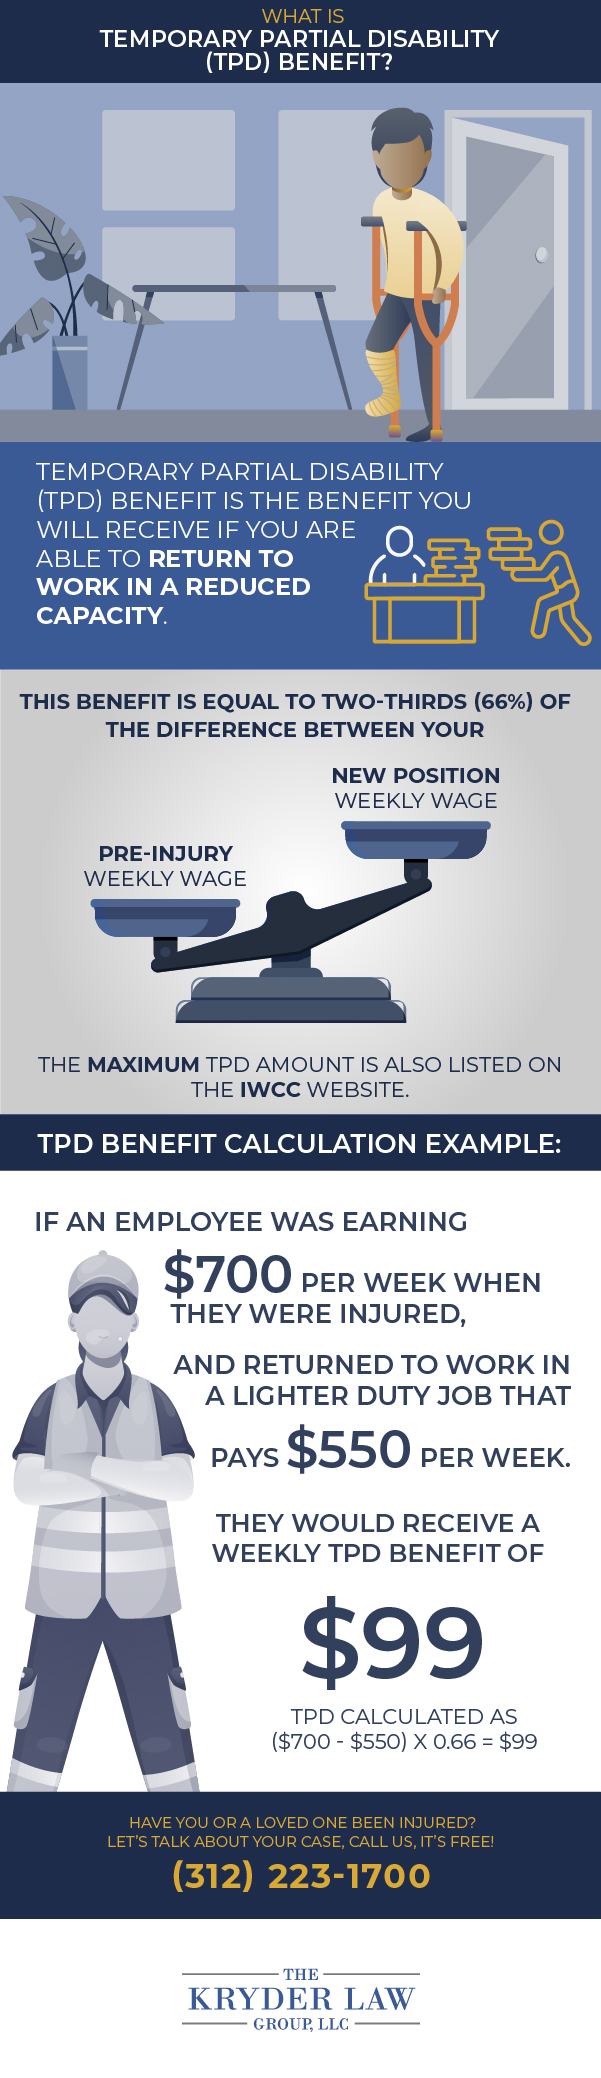 What is Temporary Partial Disability (TPD) Benefit?